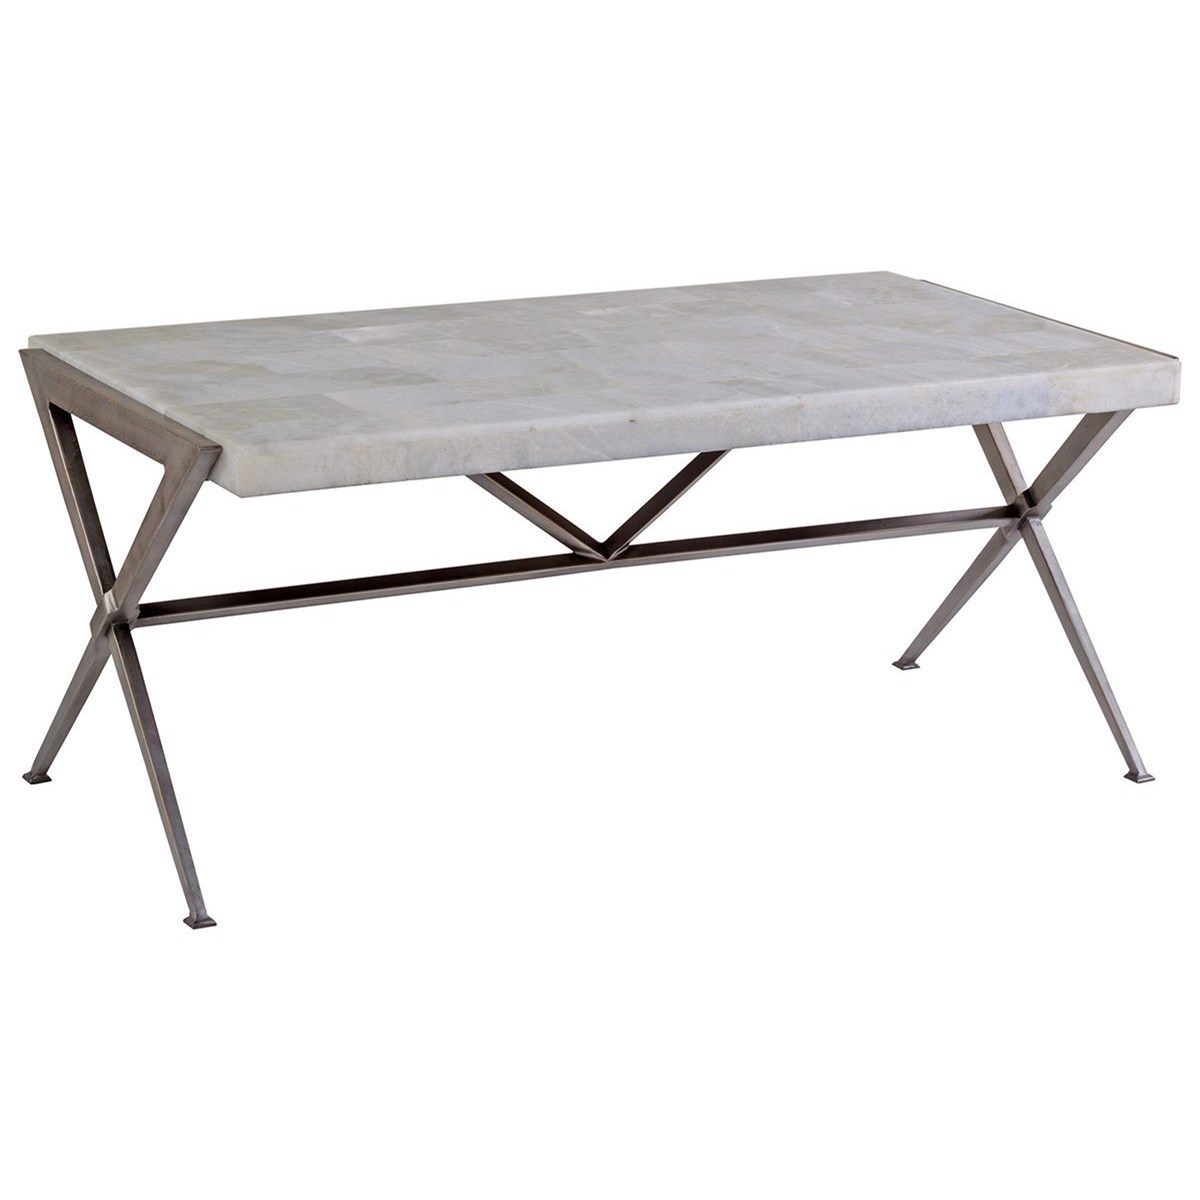 Transitional Rectangular Cocktail Table with White Onyx Top